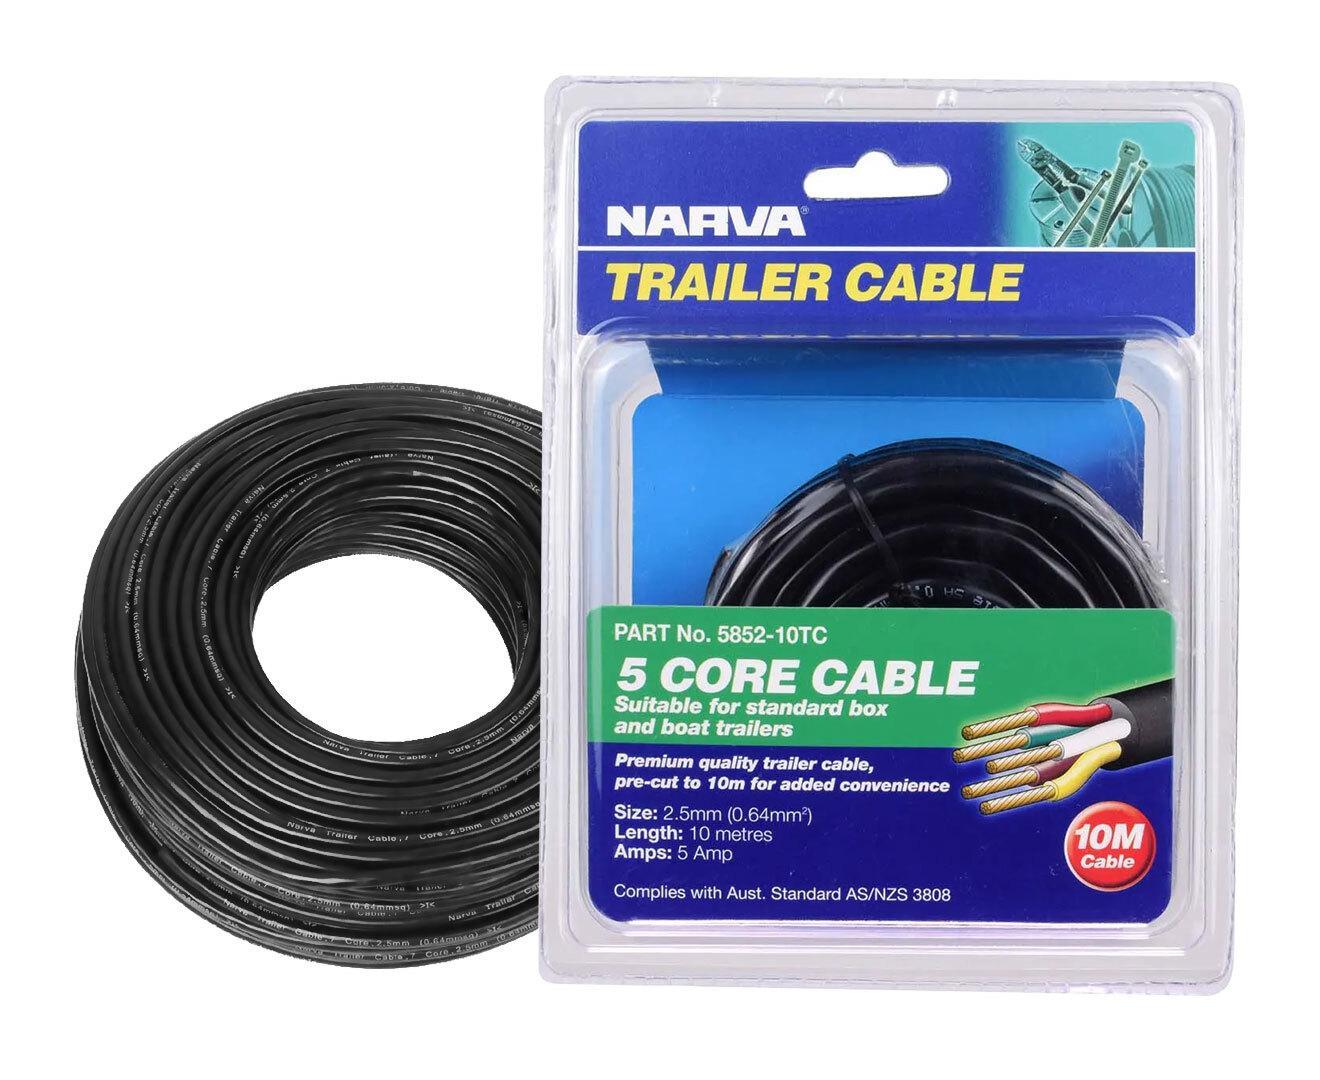 Narva 5 Core Trailer Cable 2.5mm 5A 10m Automotive Boat Caravan Truck Wire Cable V90 PVC Insulated